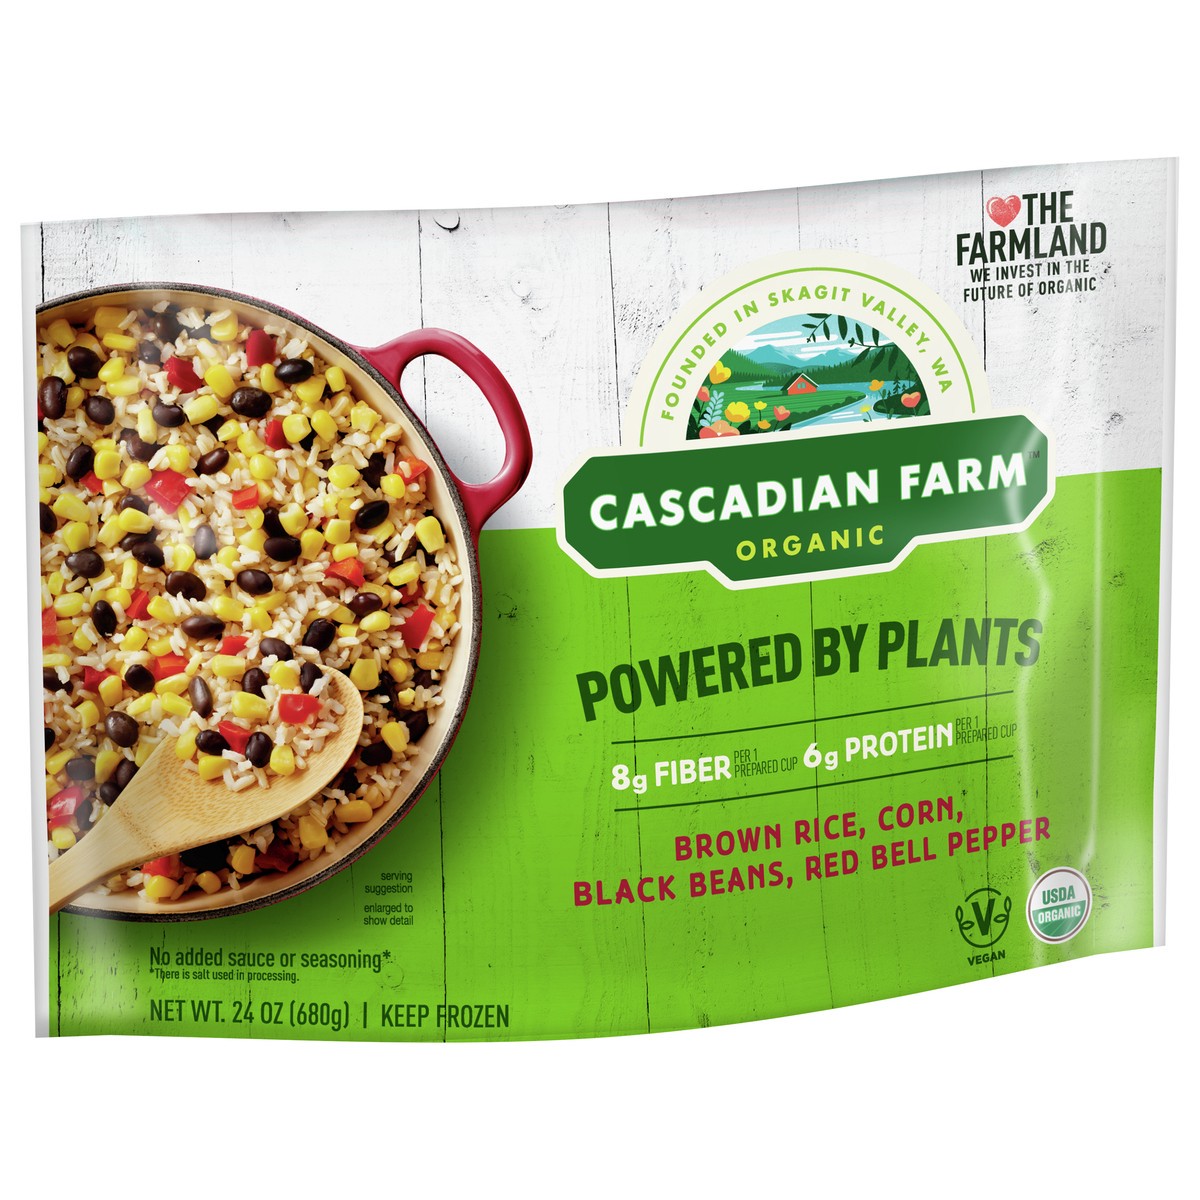 slide 6 of 9, Cascadian Farm Organic Powered By Plants Frozen Vegetables – Brown Rice, Corn, Black Beans and Red Bell Pepper, 24 oz., 24 oz